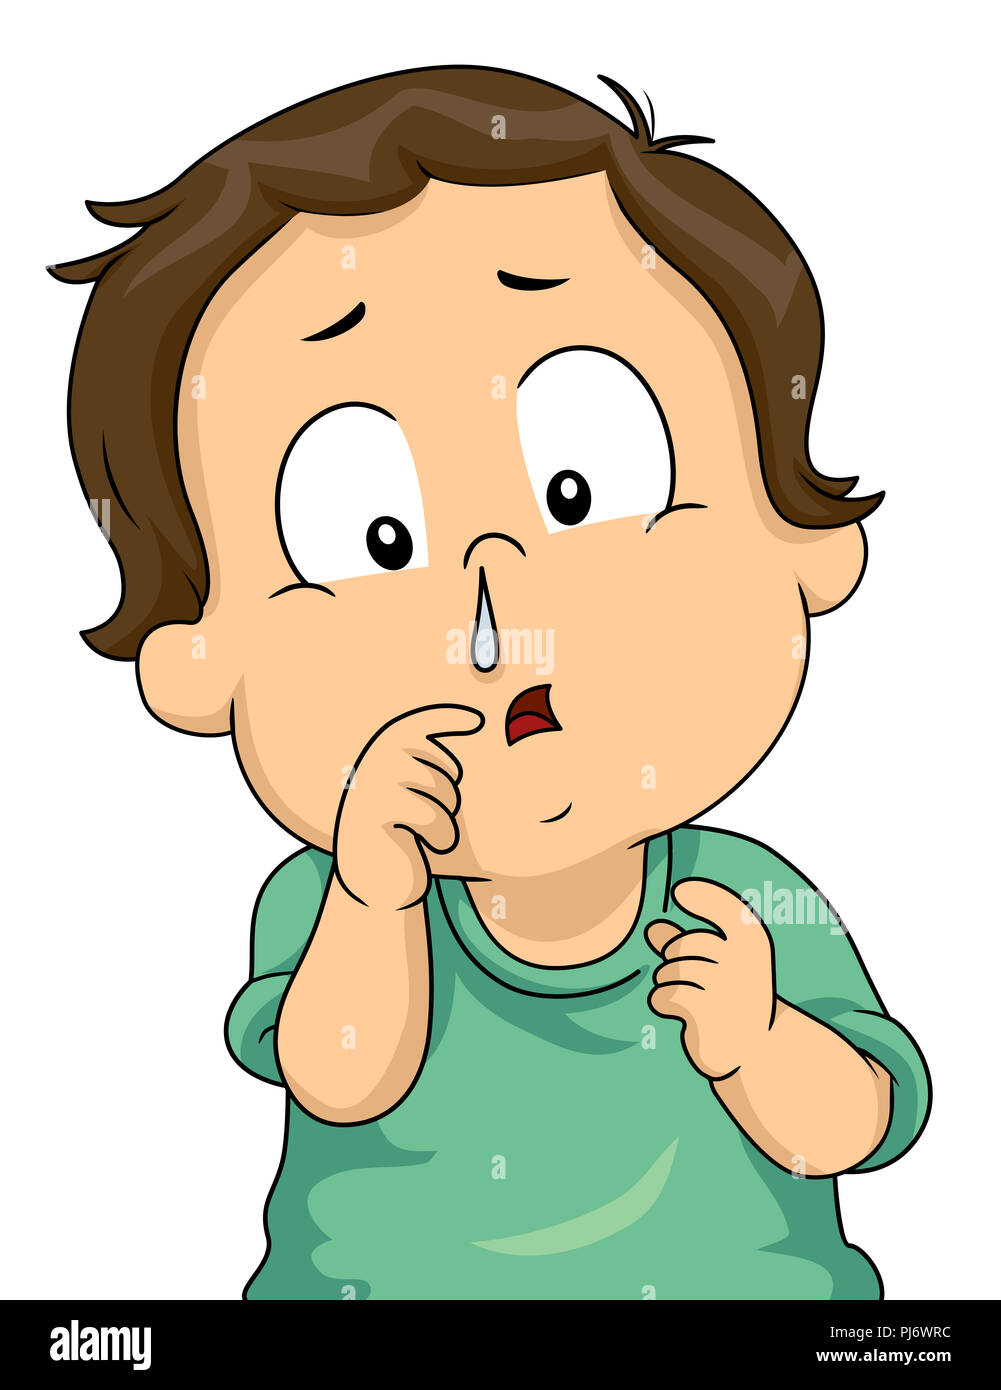 Illustration of a Kid Boy with a Runny Nose Stock Photo - Alamy